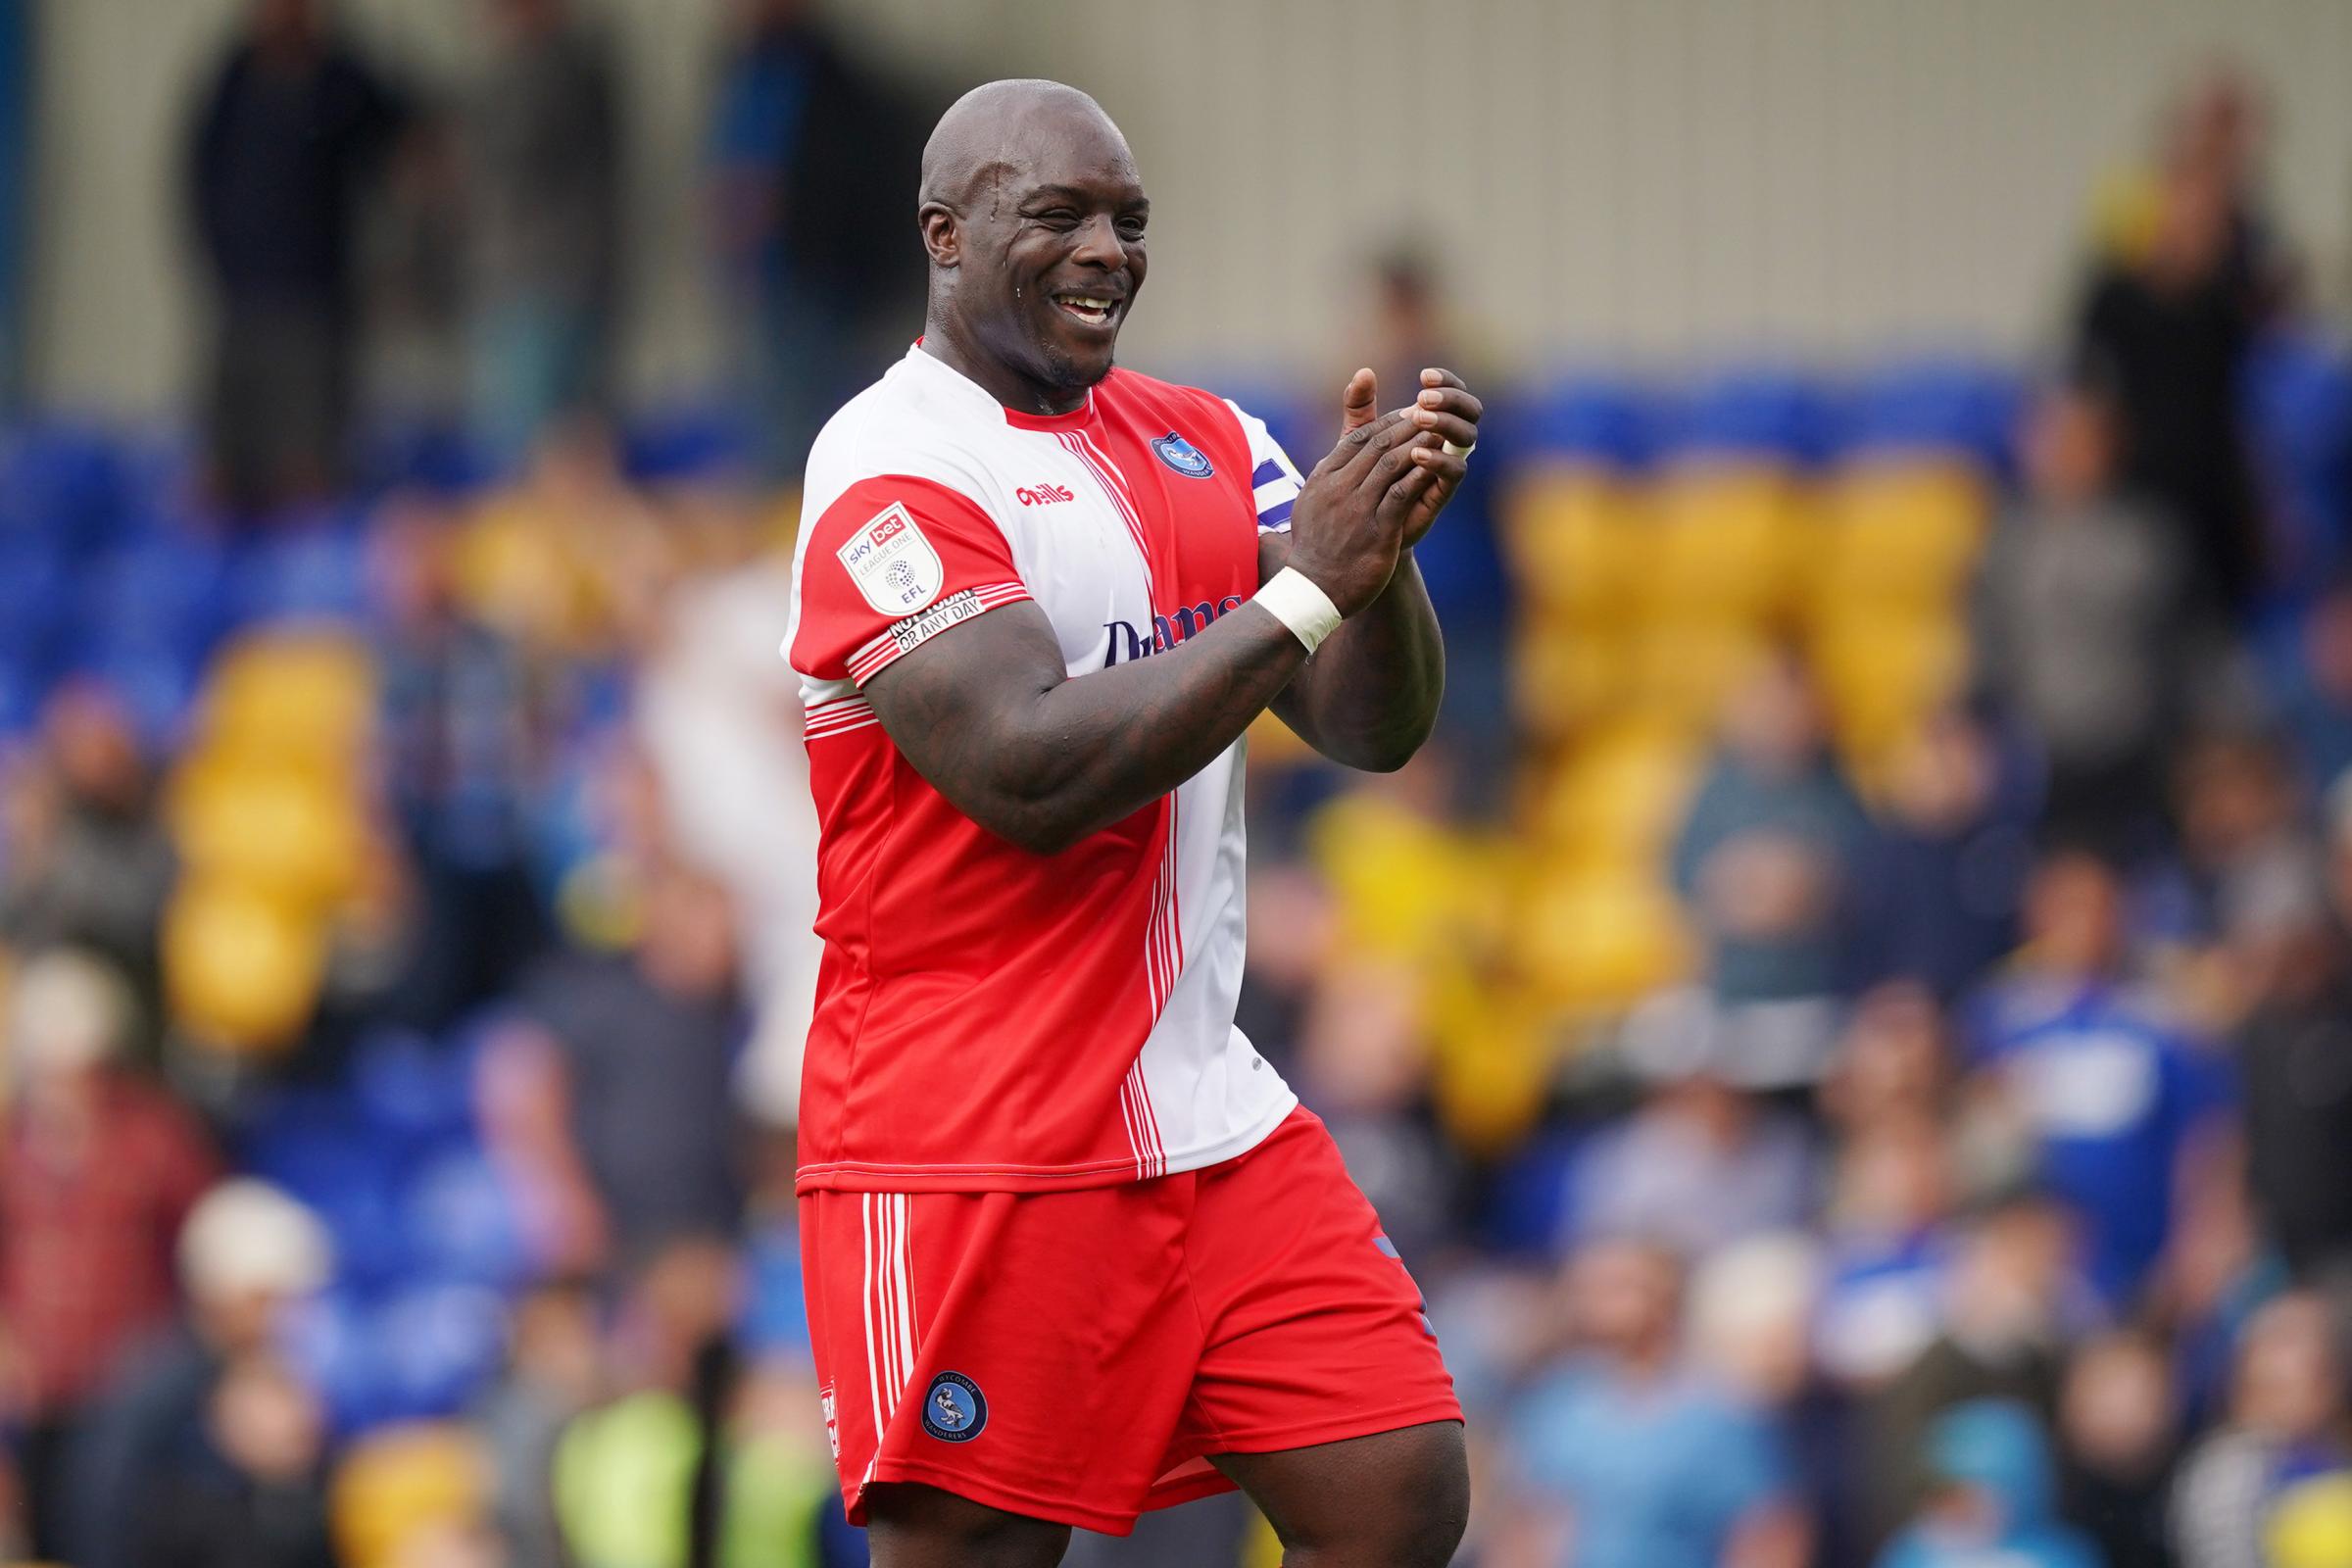 Adebyao Akinfenwa leaves Wycombe after six years with the club (PA)